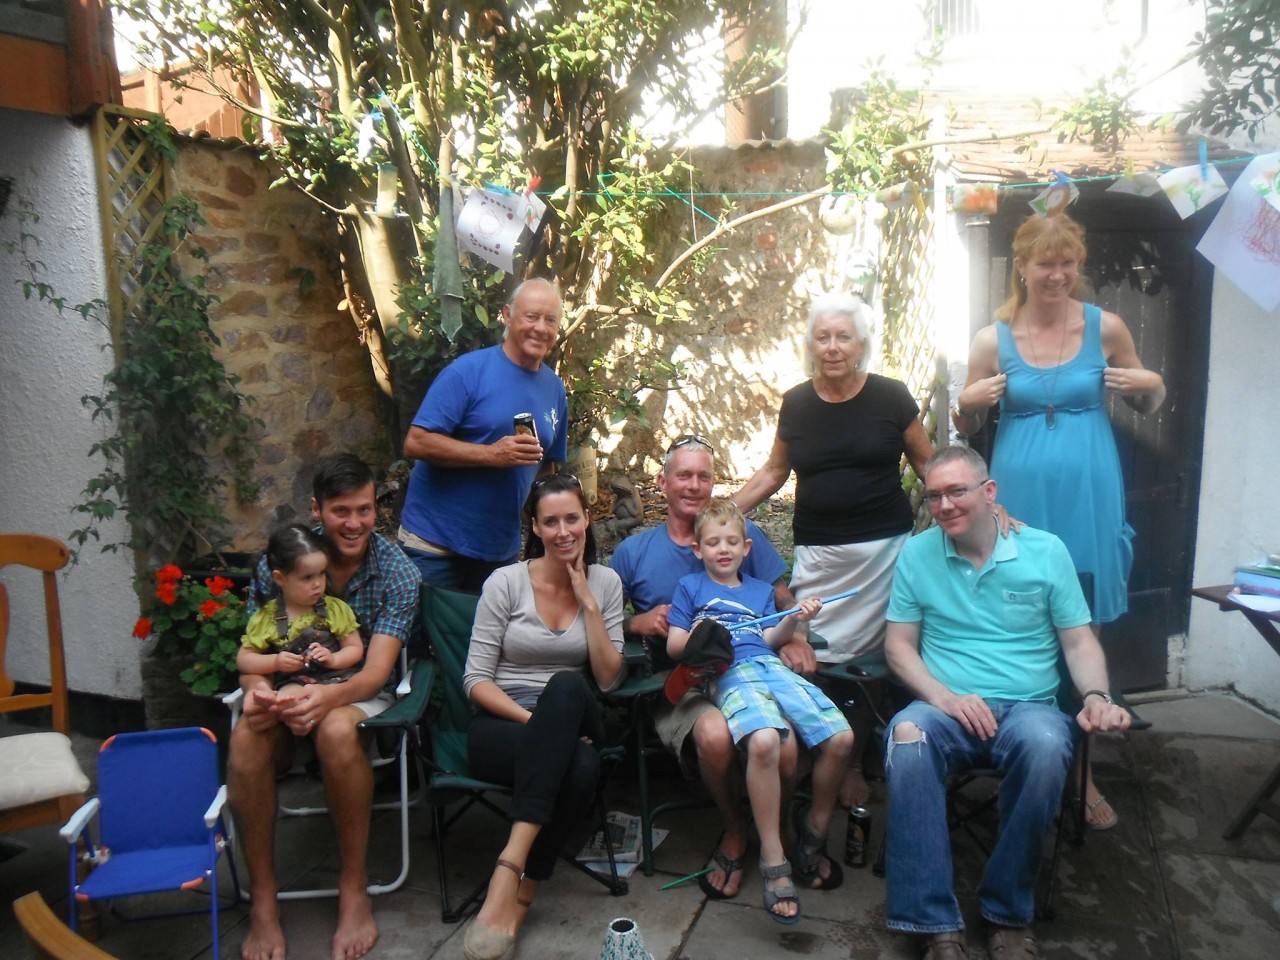 Ian-middle-blue-with-brother-sister-mum-stepdad-bro-inlaw-and-sis-inlaw-oh-and-nephew-and-niece